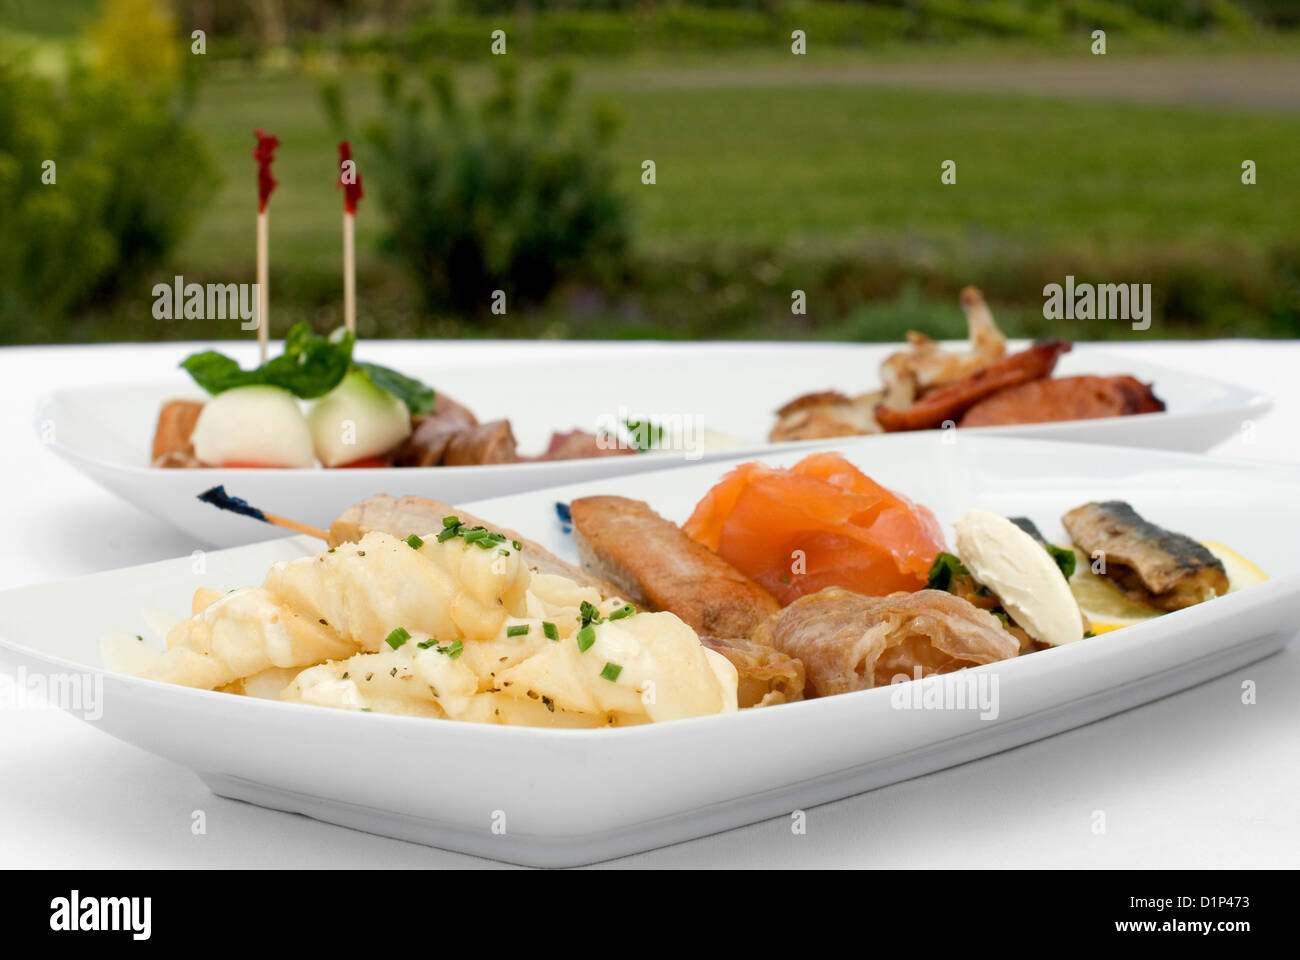 Entree tasting plates containing an assortment of seafood and meats Stock Photo